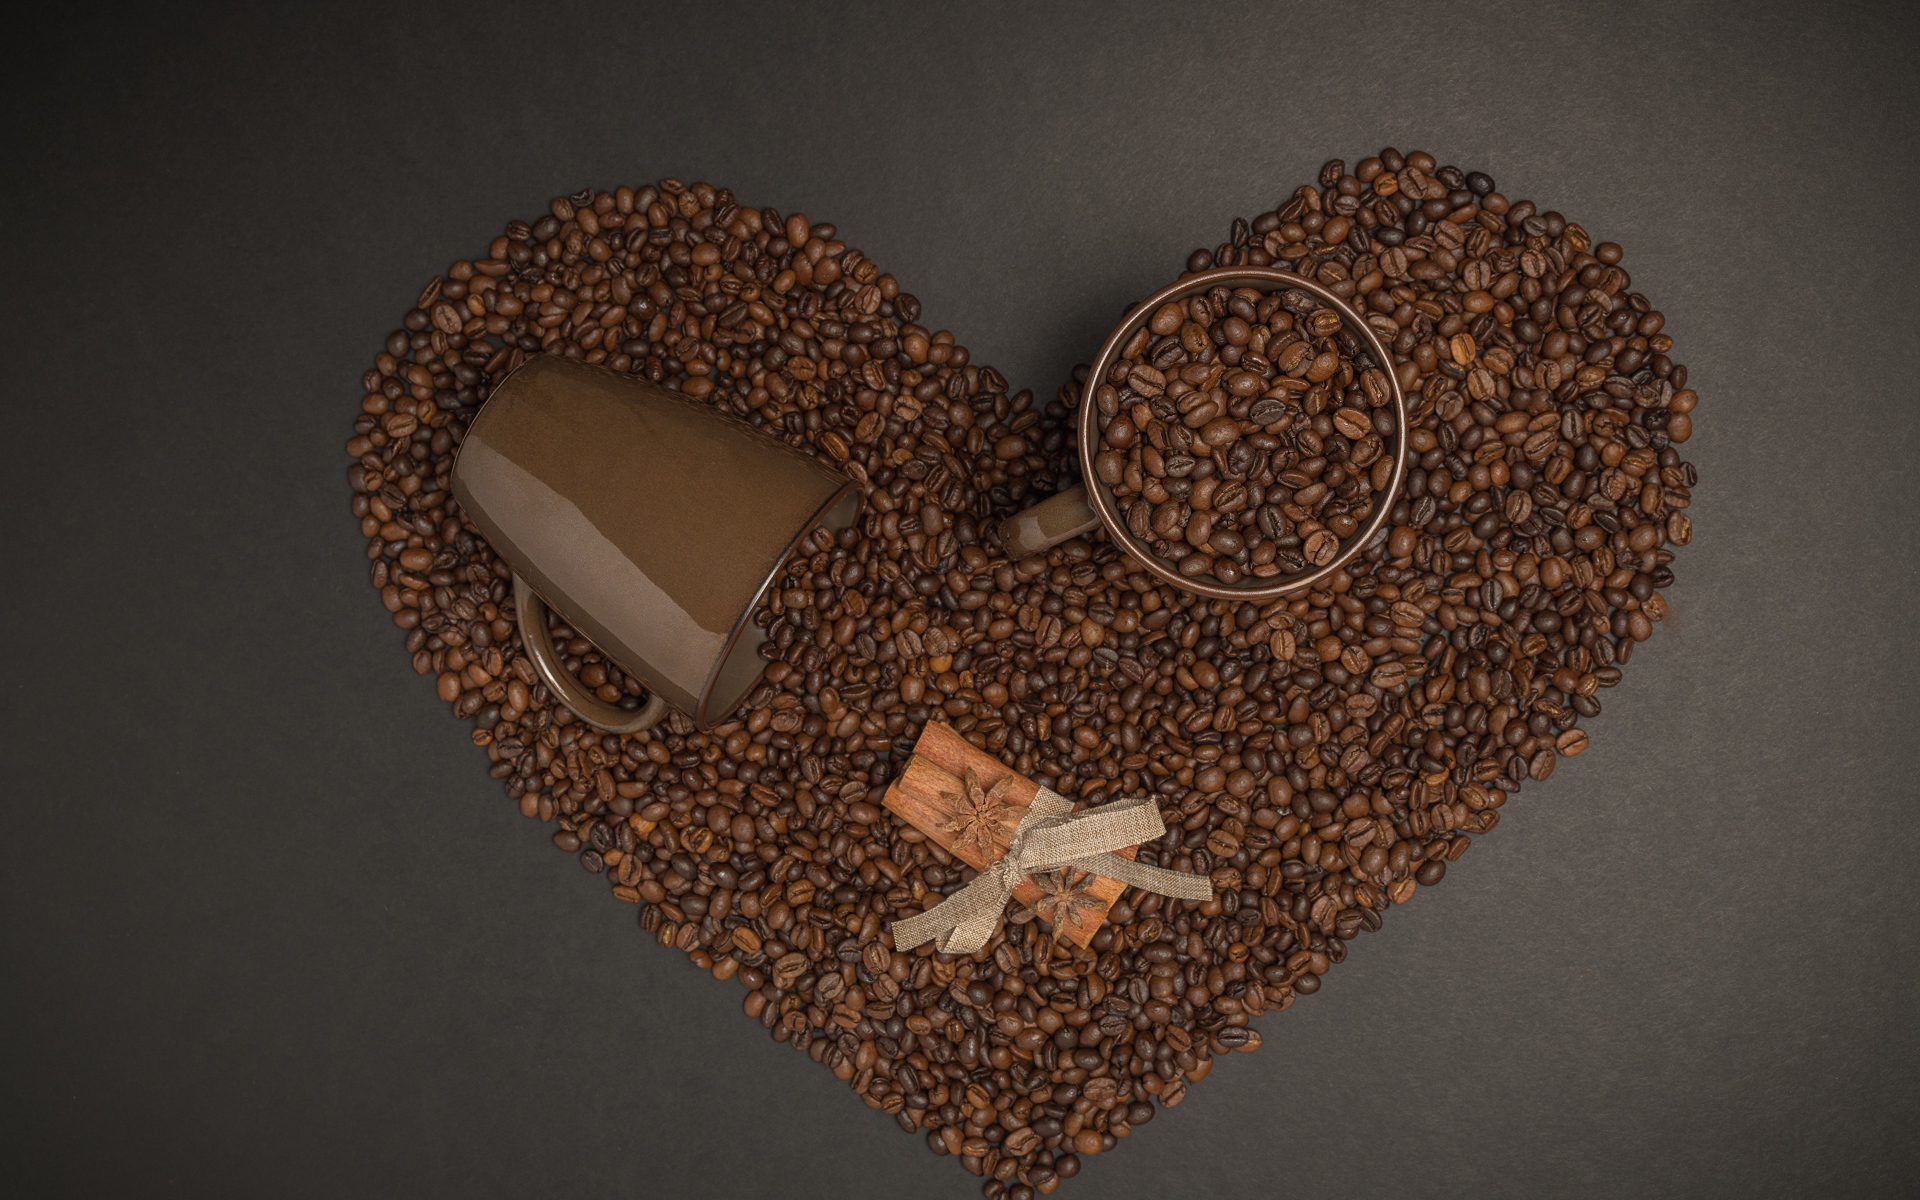 Heart made of coffee beans on a gray background with mugs